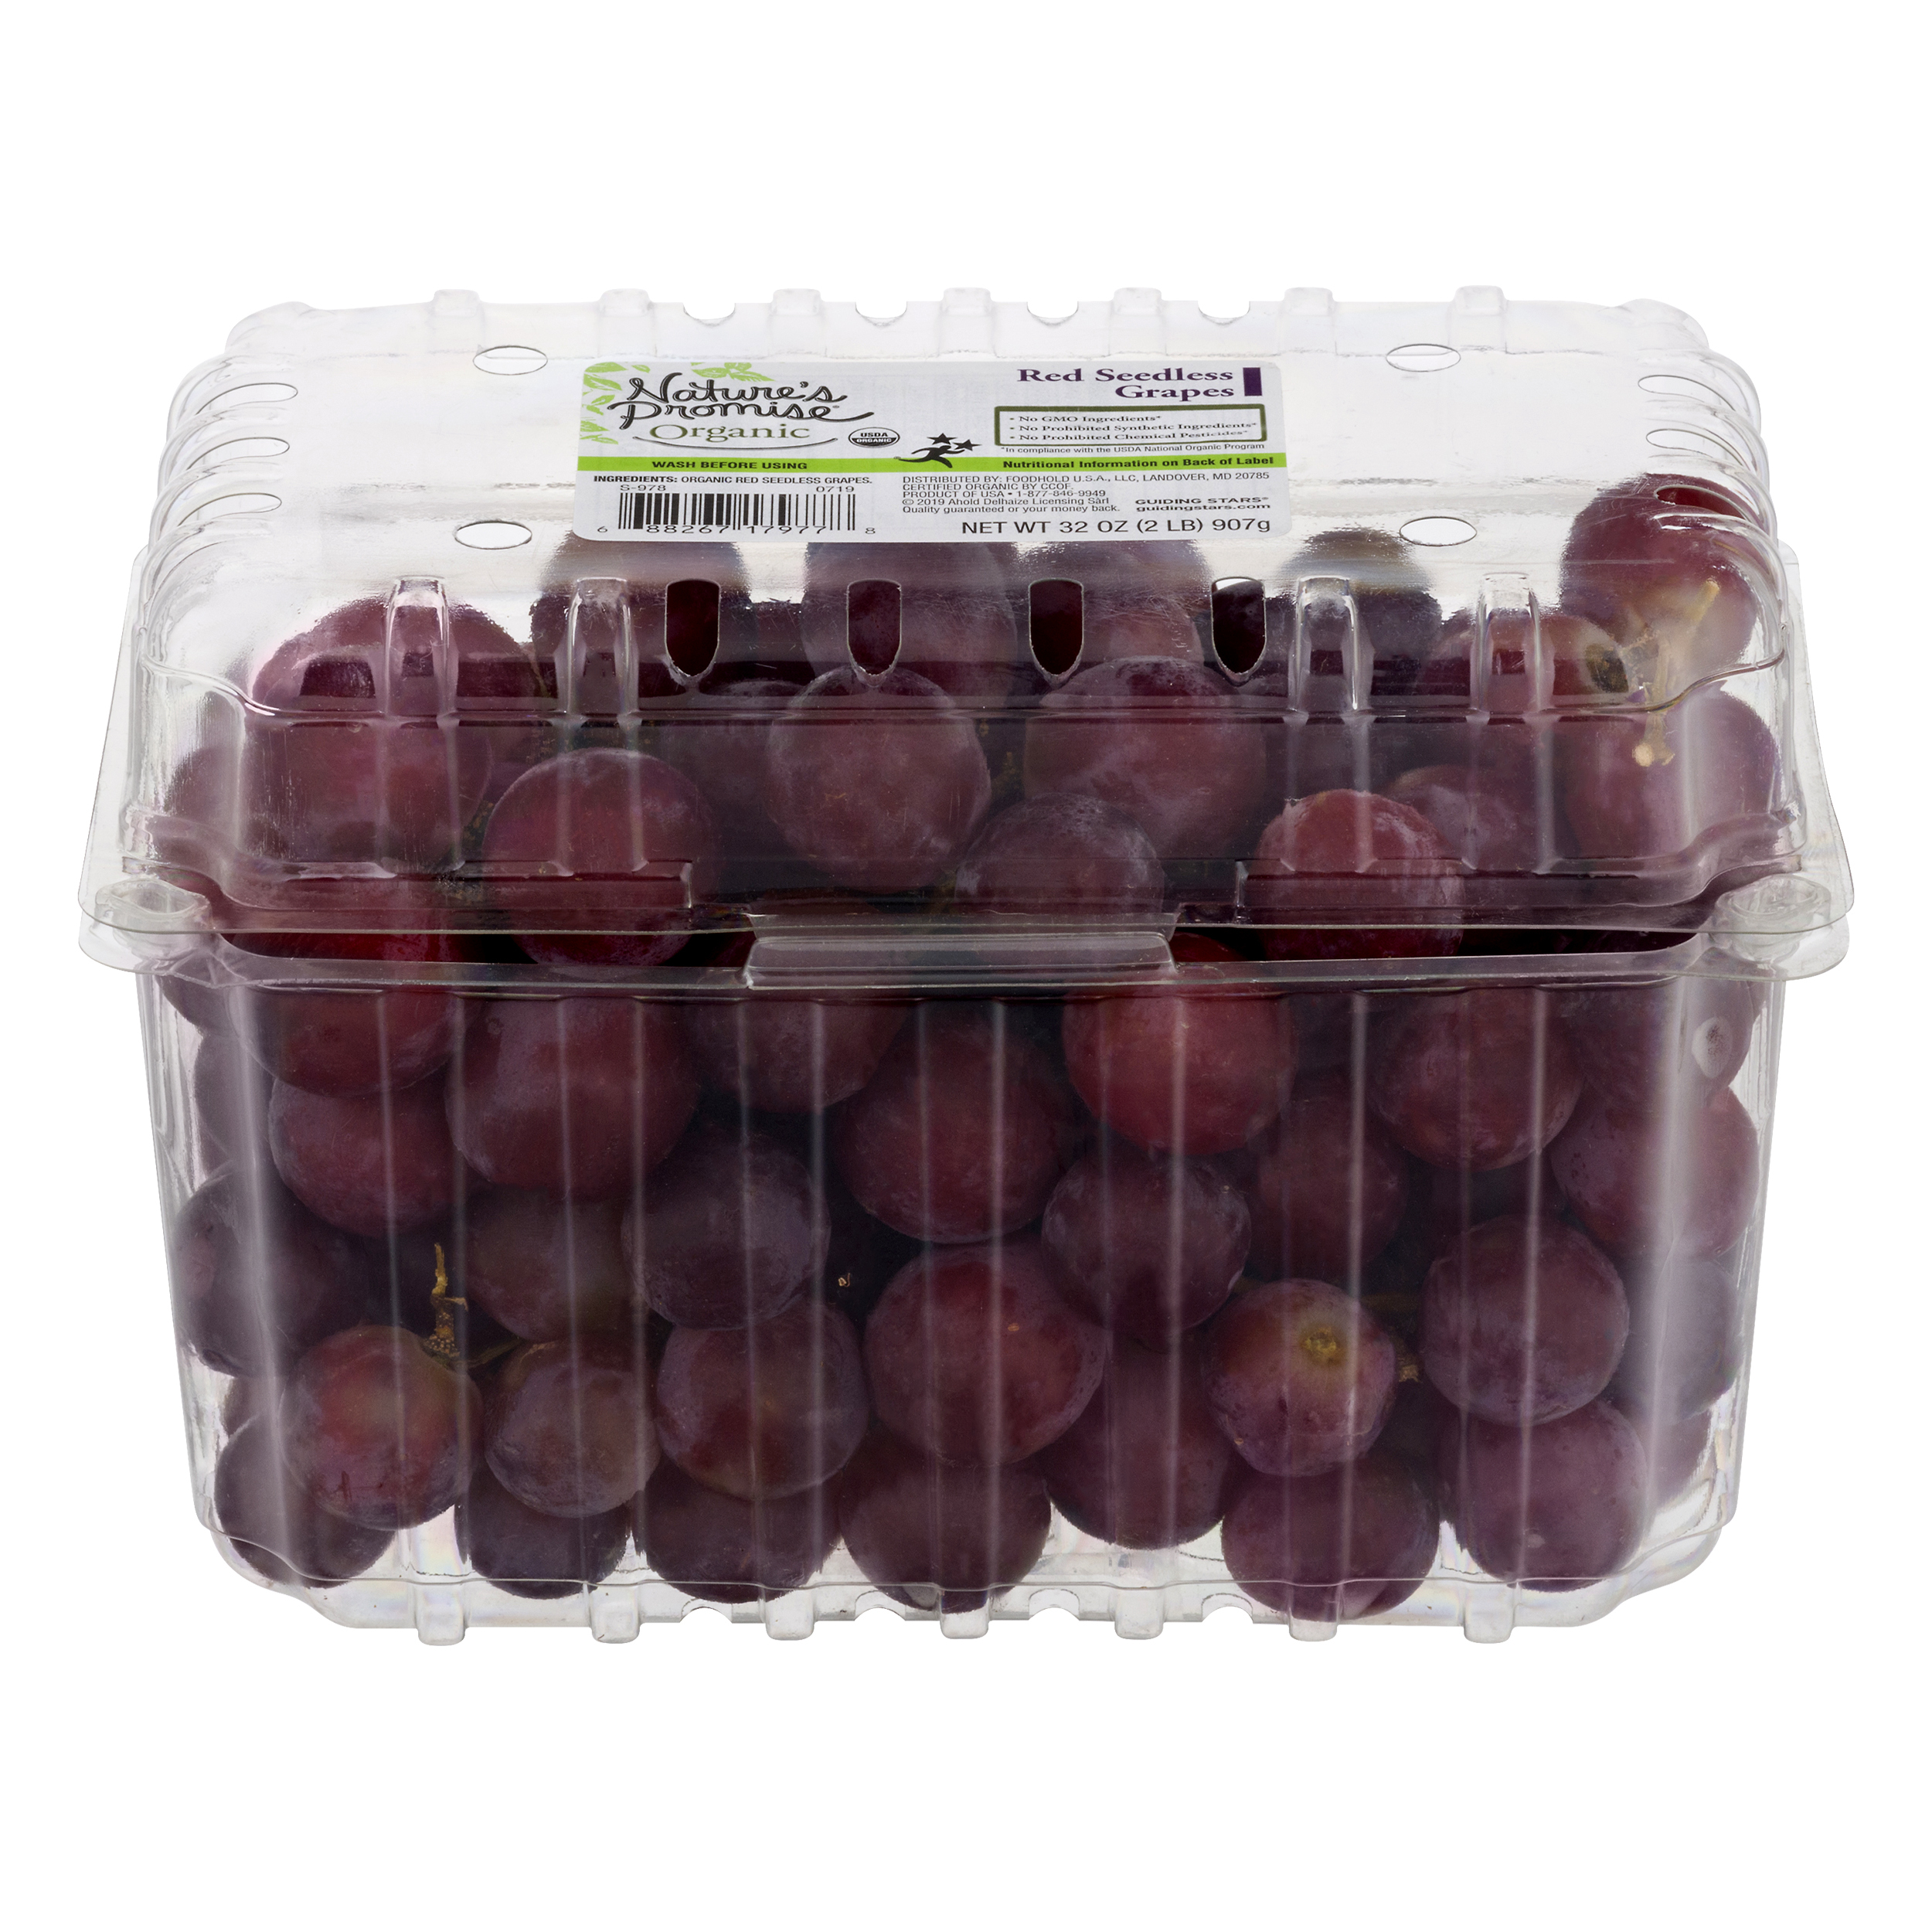 Simple Truth Organic™ Clamshell Seedless Green Grapes, 32 oz - Kroger